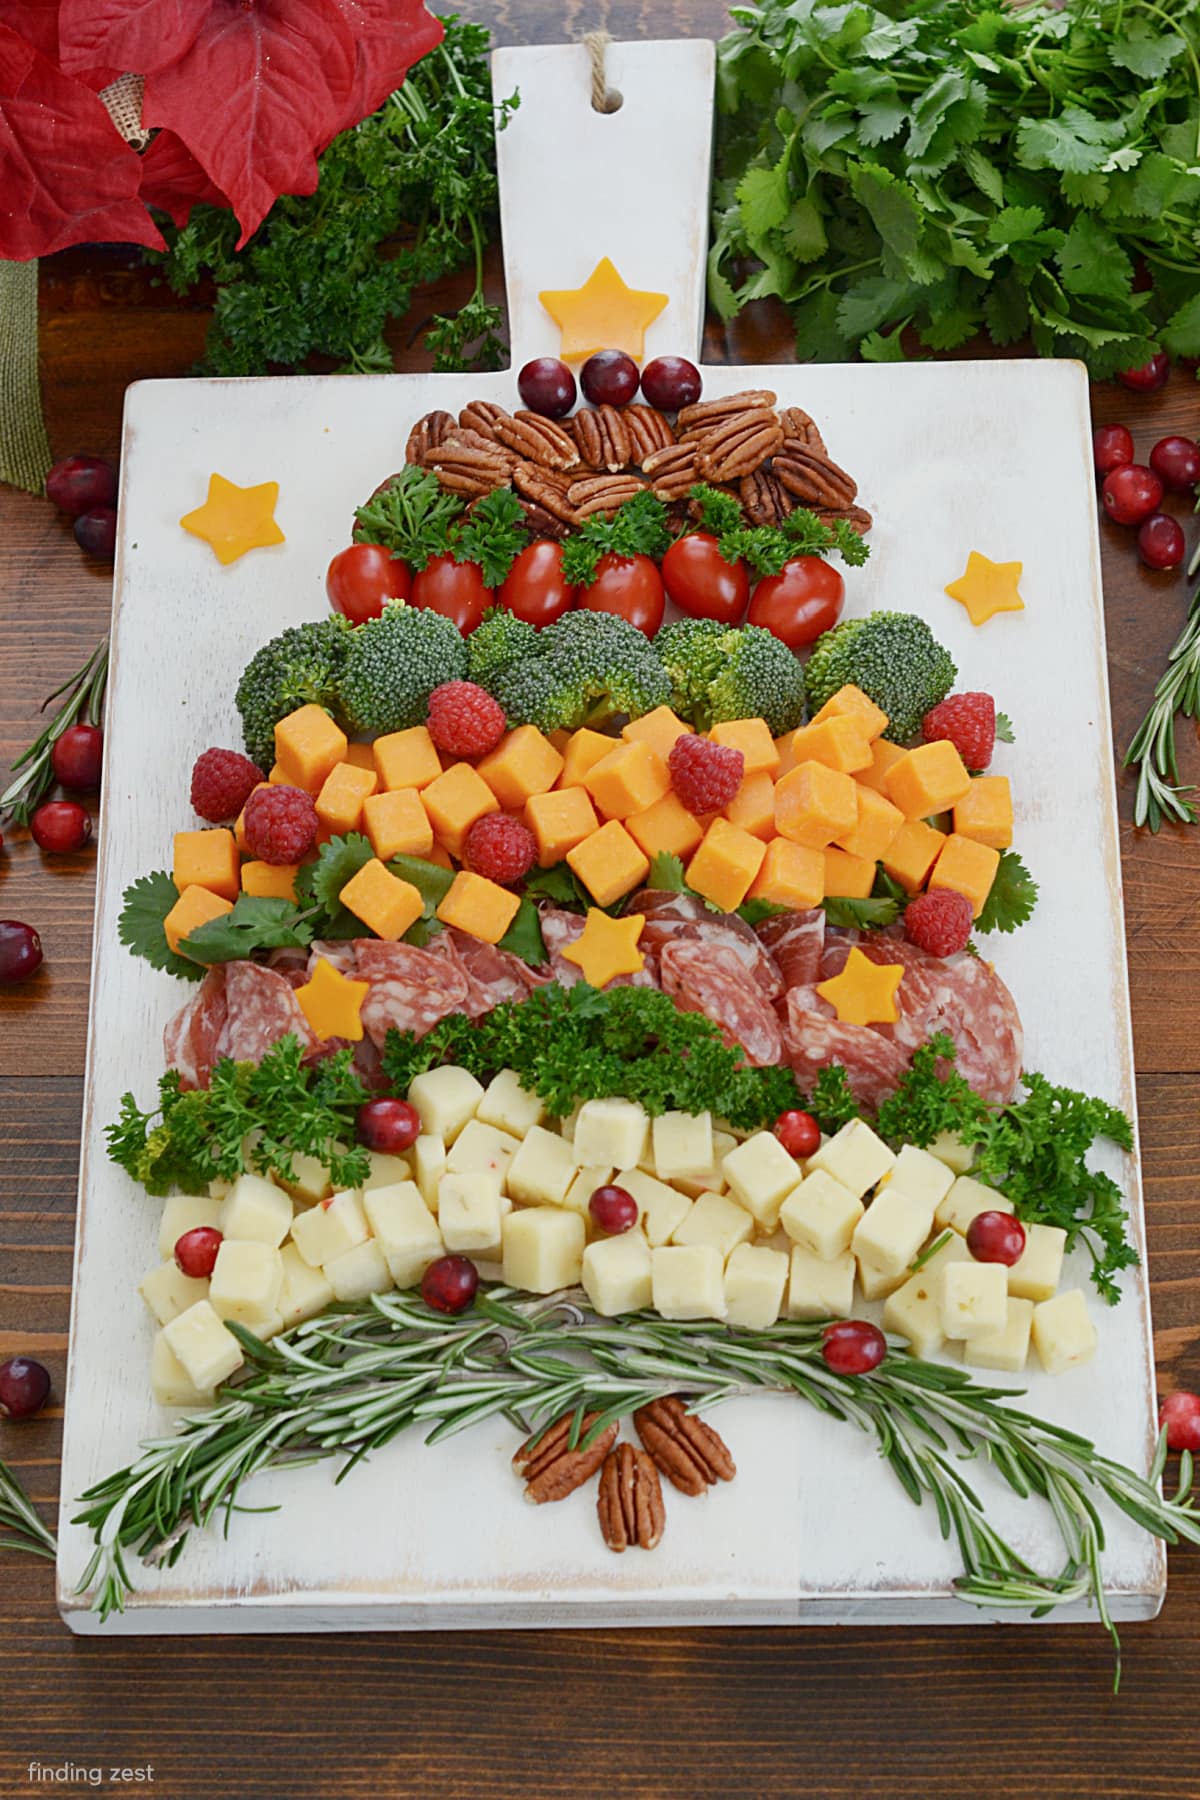 Searching for the perfect Christmas appetizer? This Christmas Tree Charcuterie Board is so easy to put together and easy for guests to nibble on as they mingle. Featuring cheese, meat, veggies fruit and nuts, everyone will love this festive snack board!